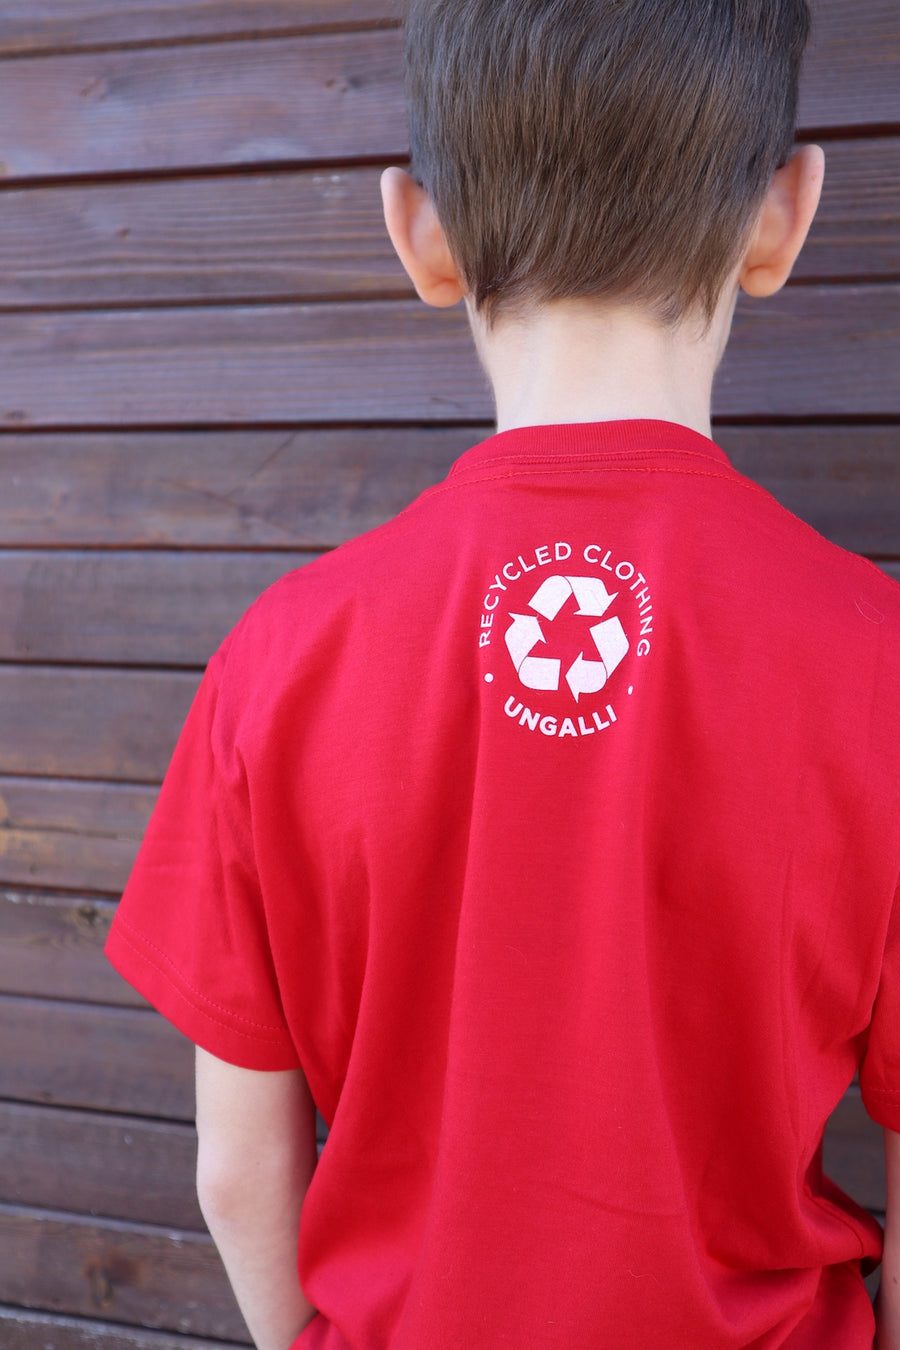 Children's recycled red t-shirt with small white "Born in Tbay" logo on front